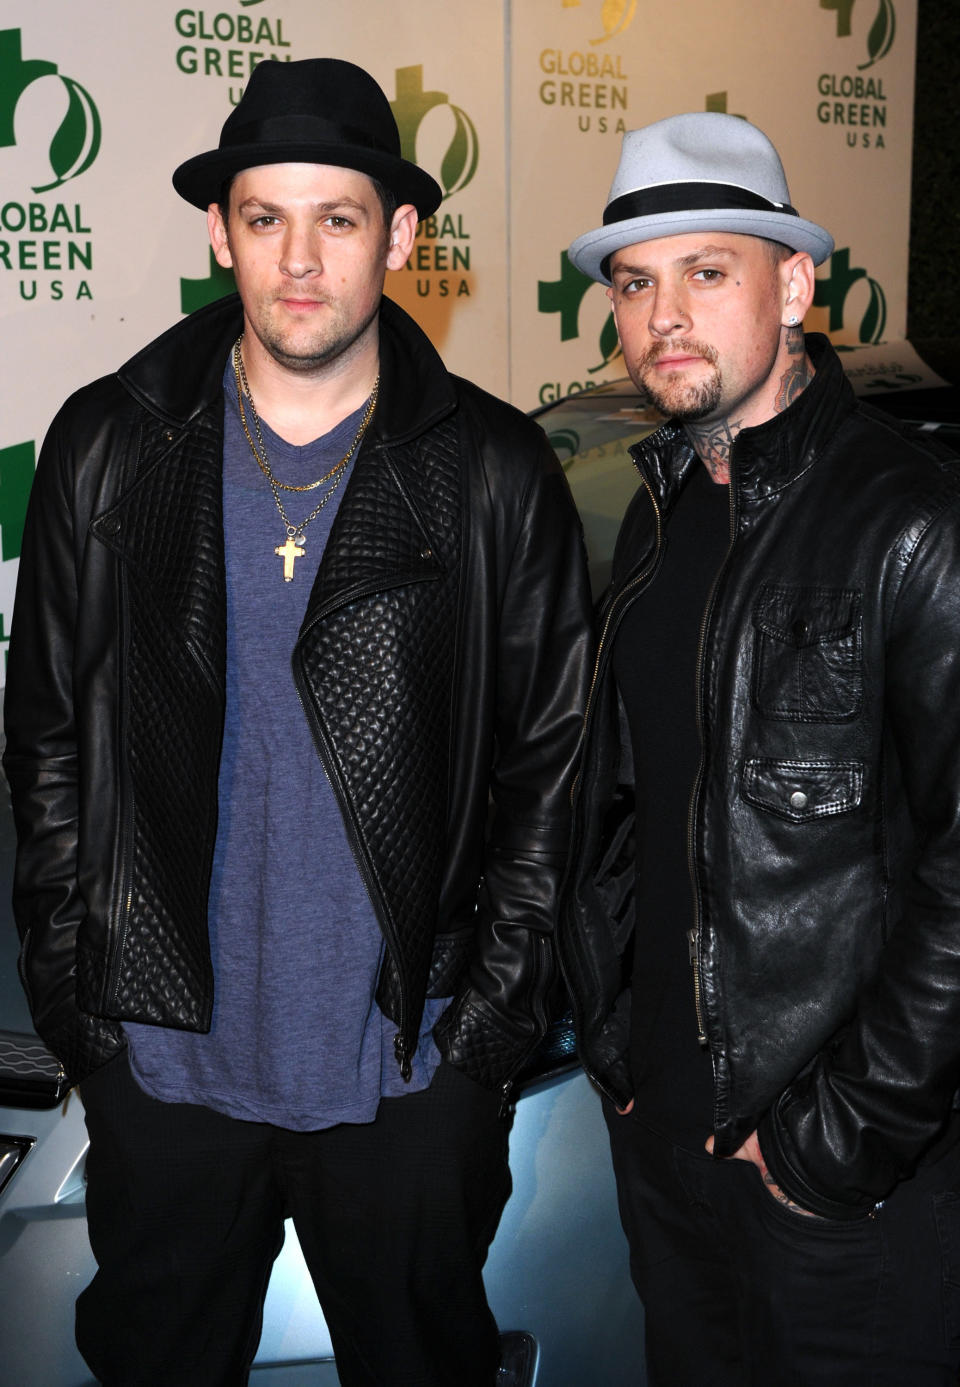 If you're a fan of Good Charlotte then you know the Madden brothers are twins (if you don't, it's pretty obvious). Joel is now married to Nicole Richie.